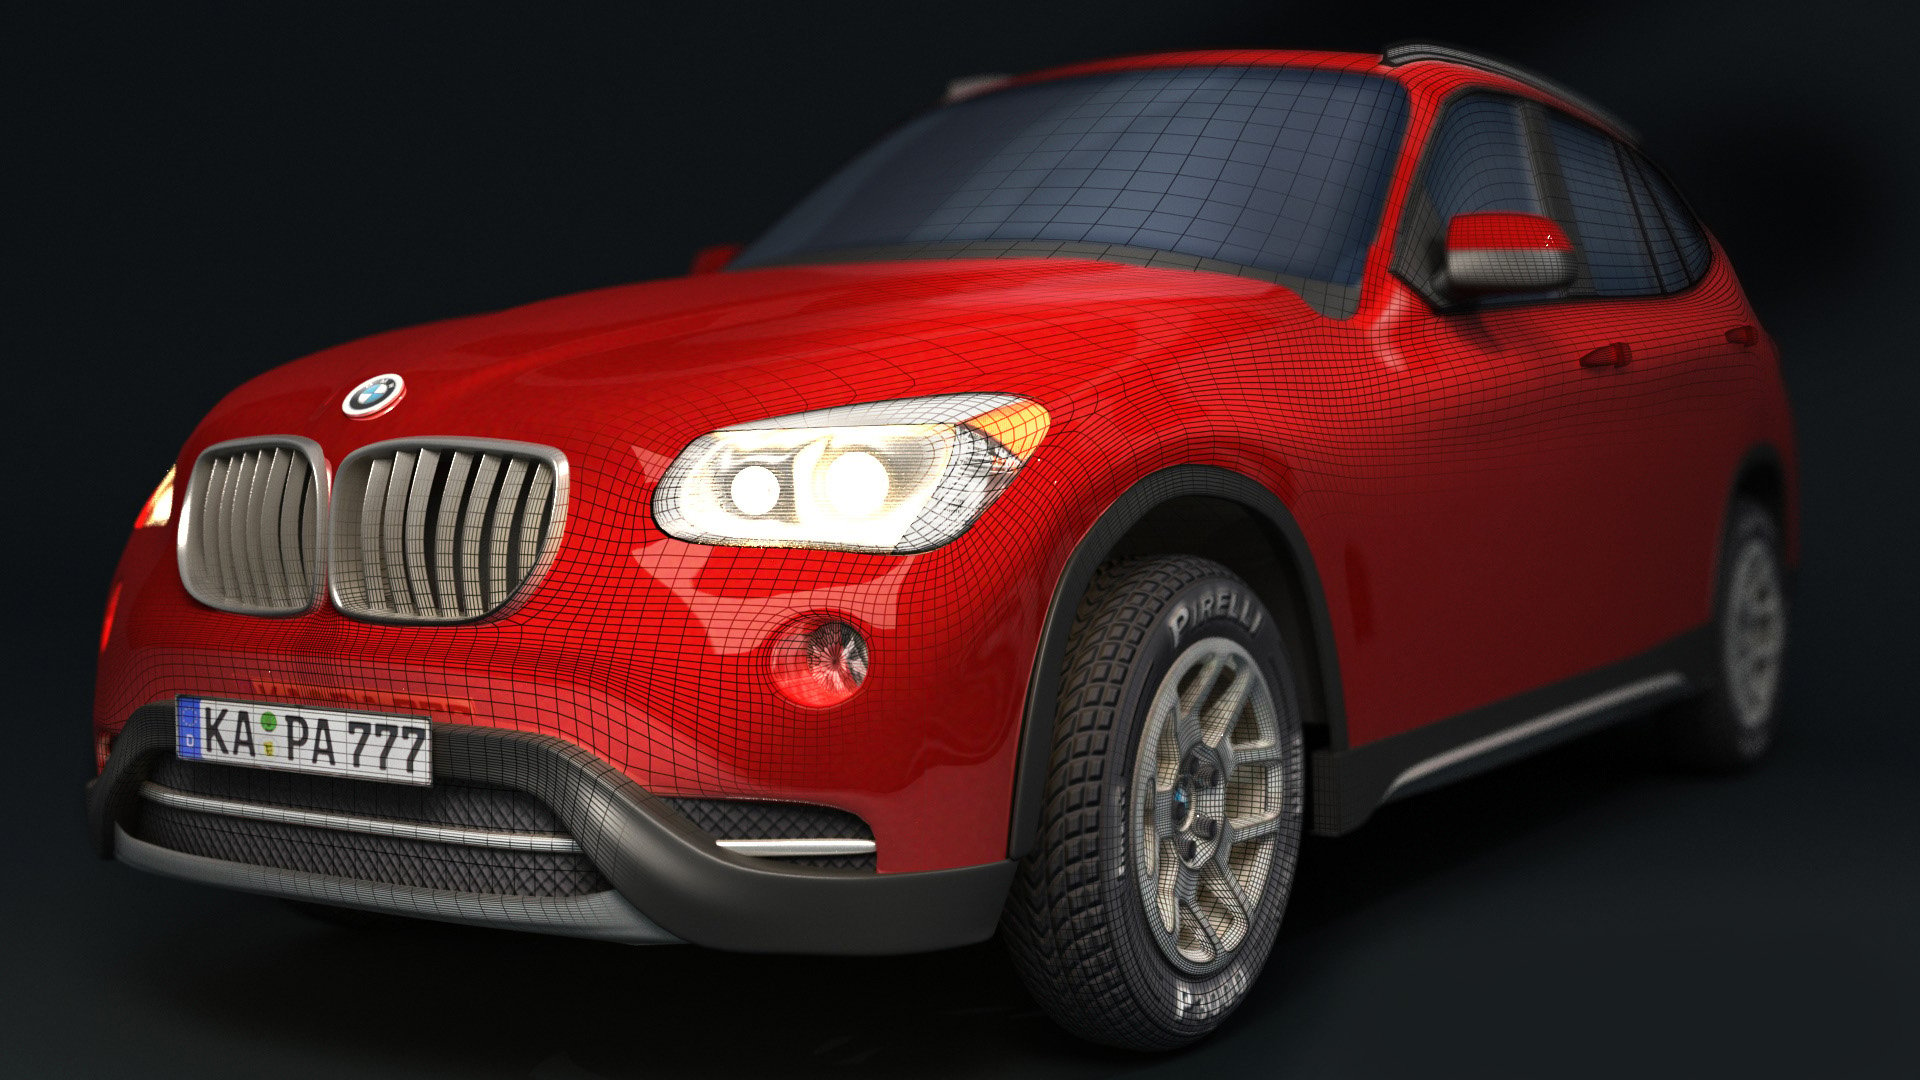 3D image of a red BMW